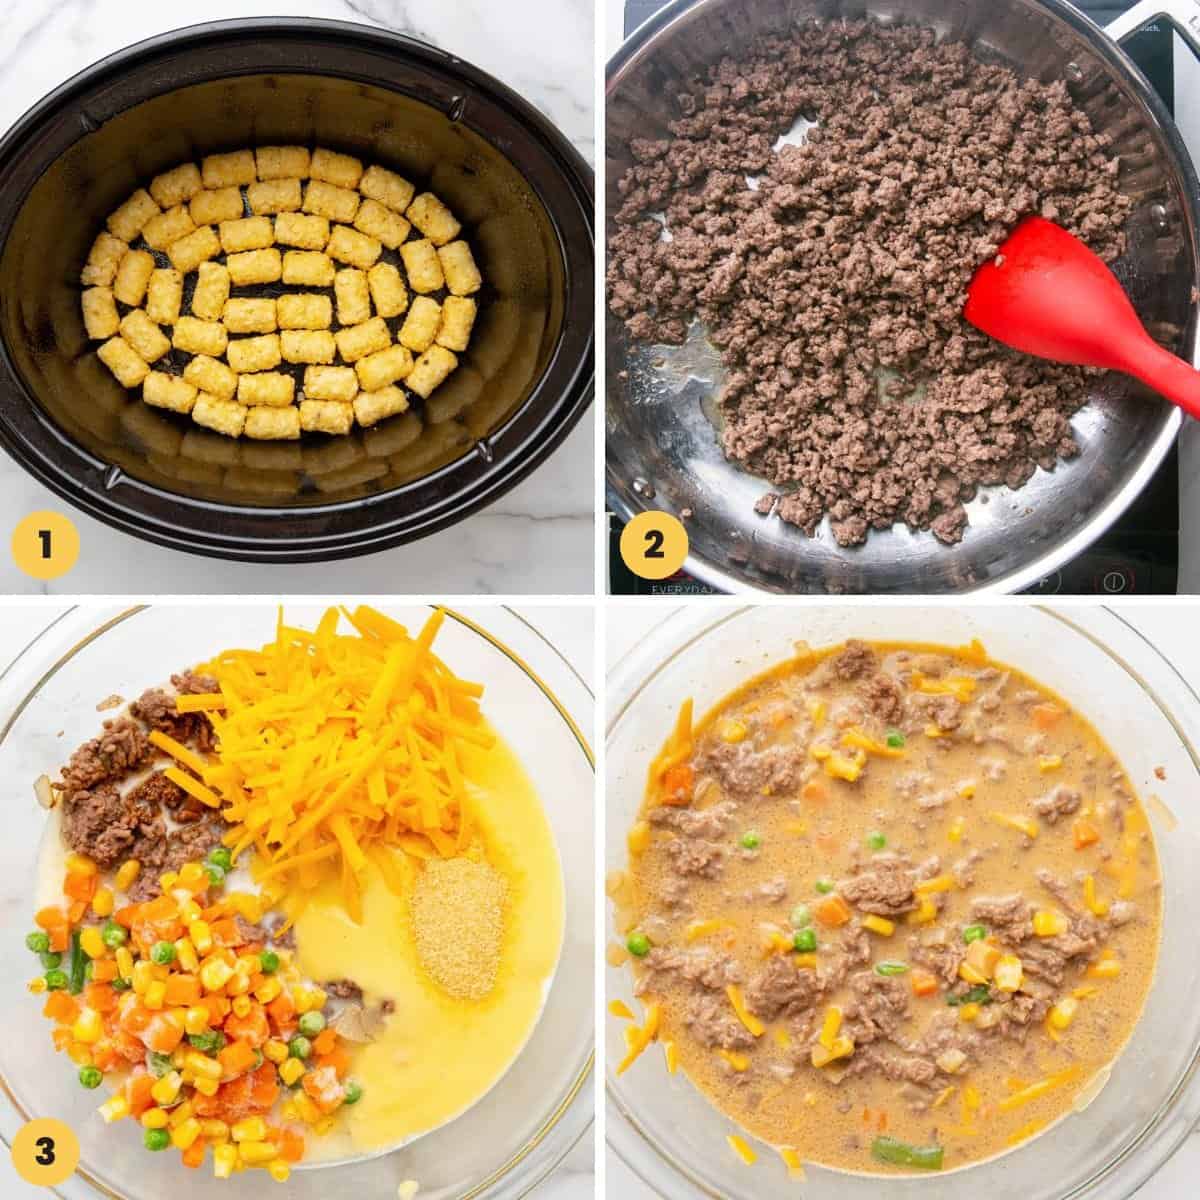 a collage of four images showing how to prepare the ingredients for tater tot casserole.